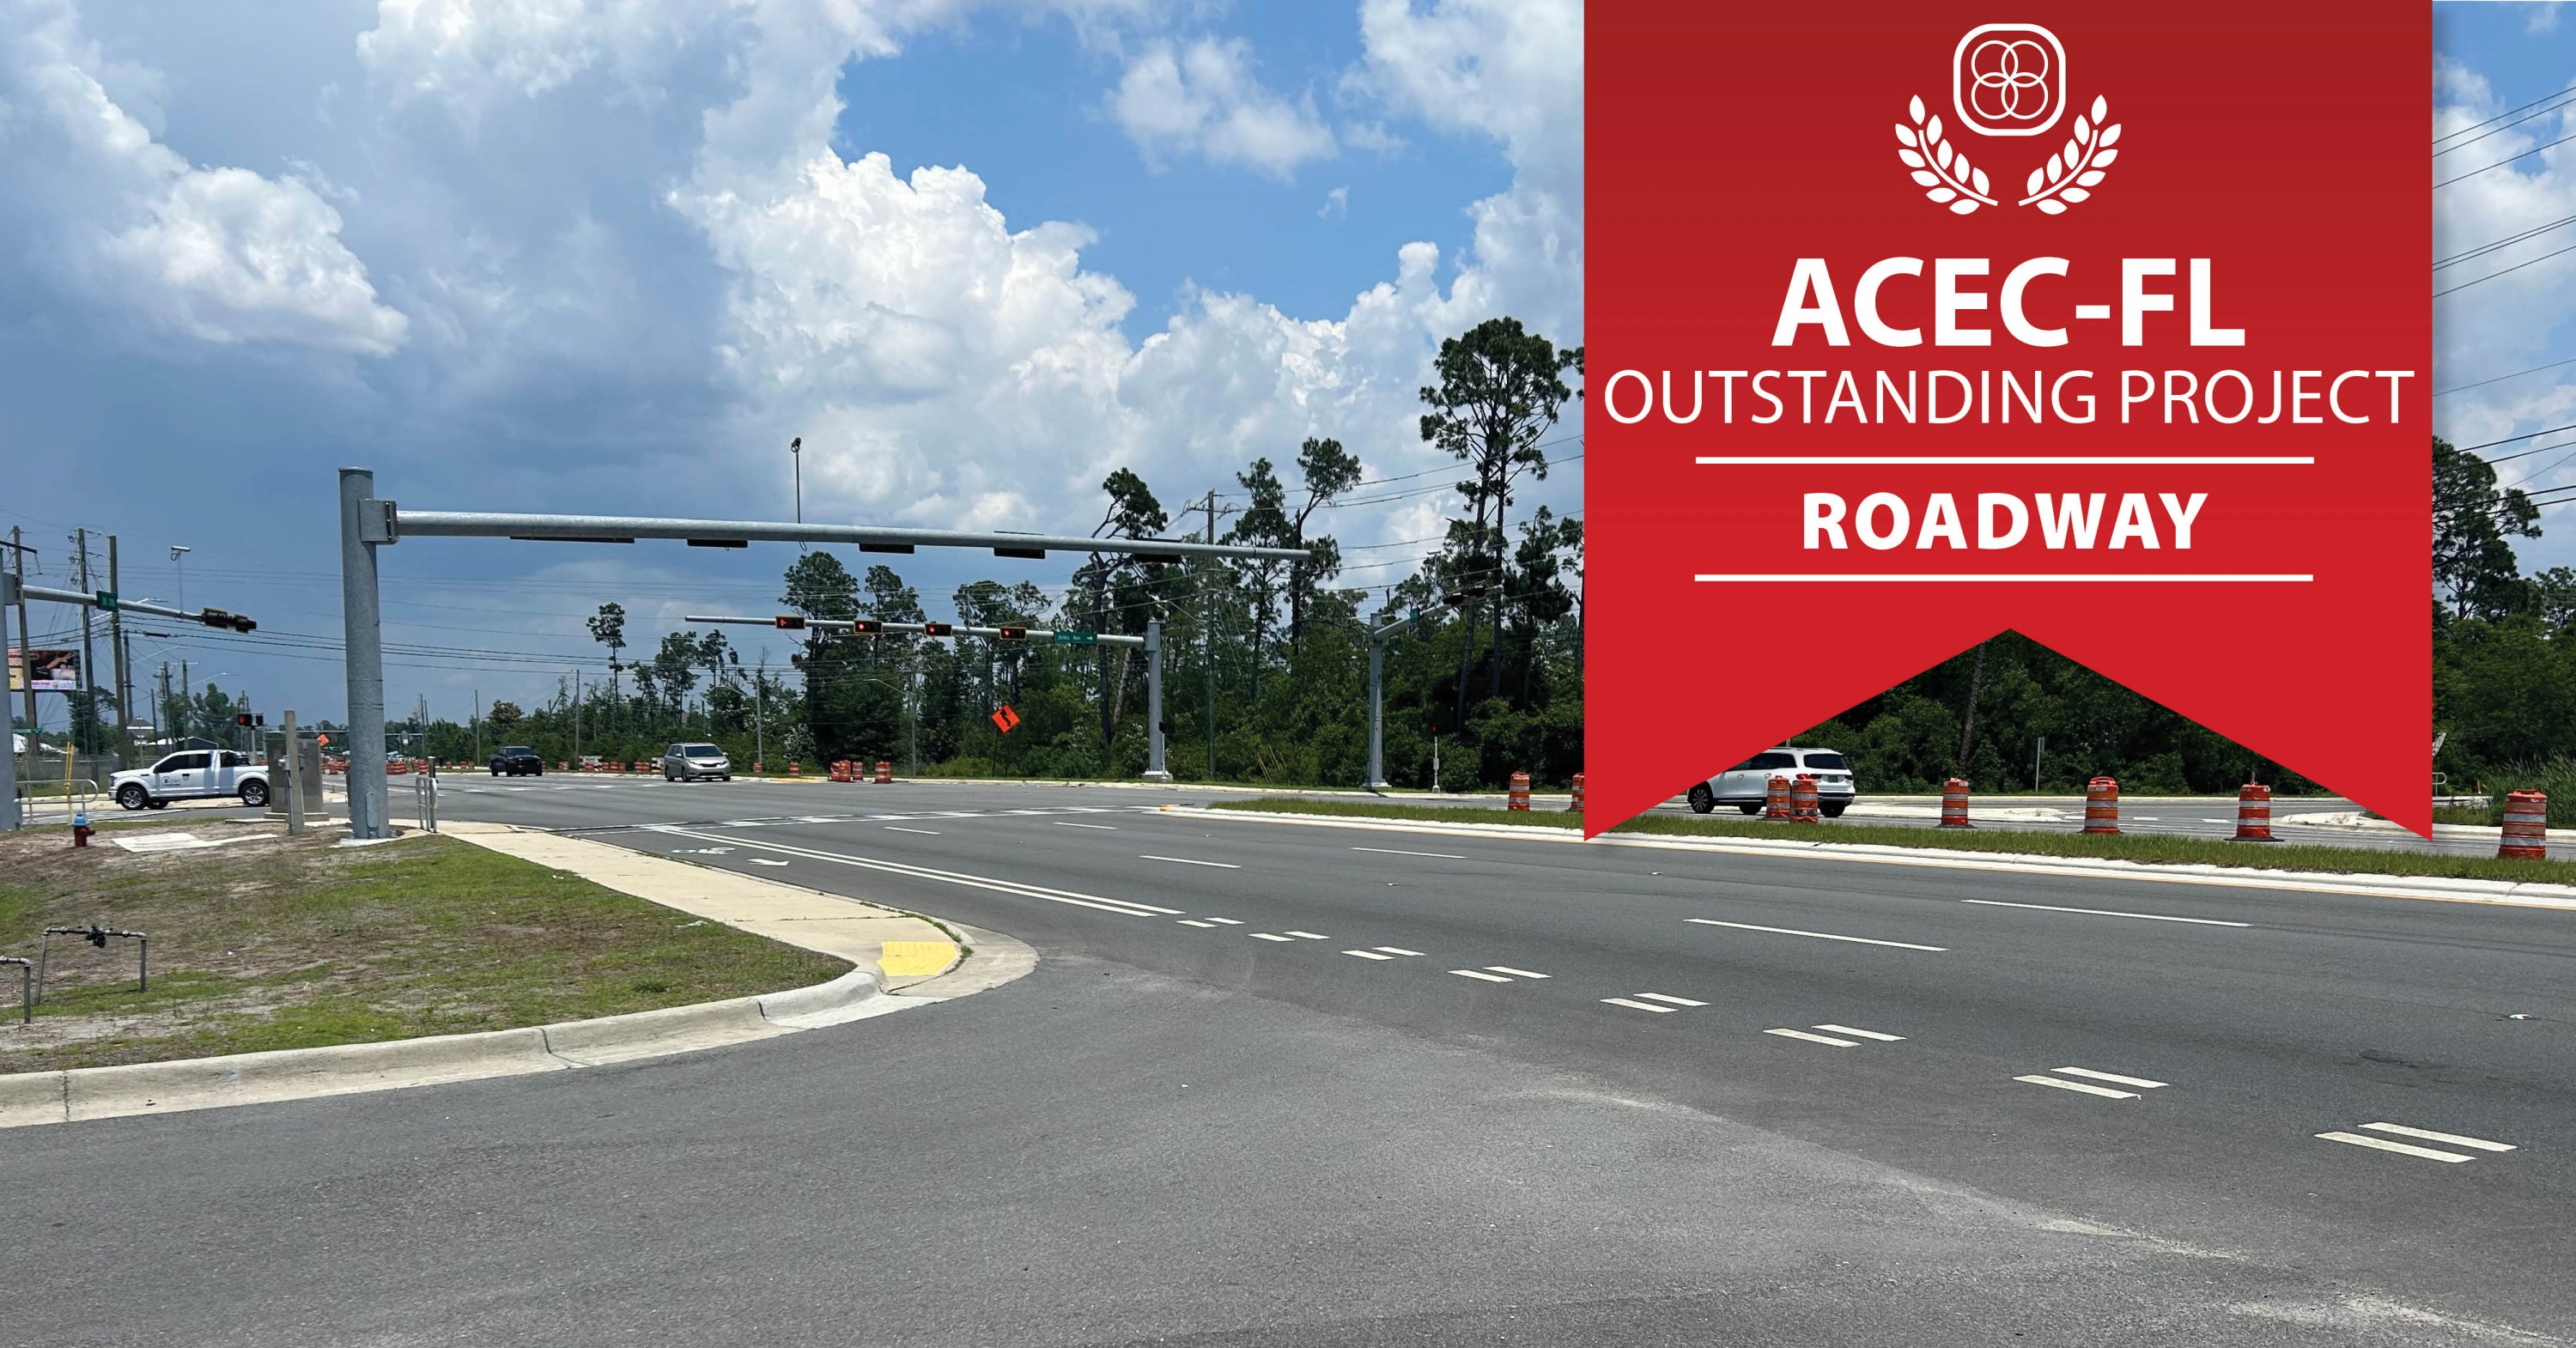 DRMP Roadway Project Wins ACEC Florida Outstanding Project Award 